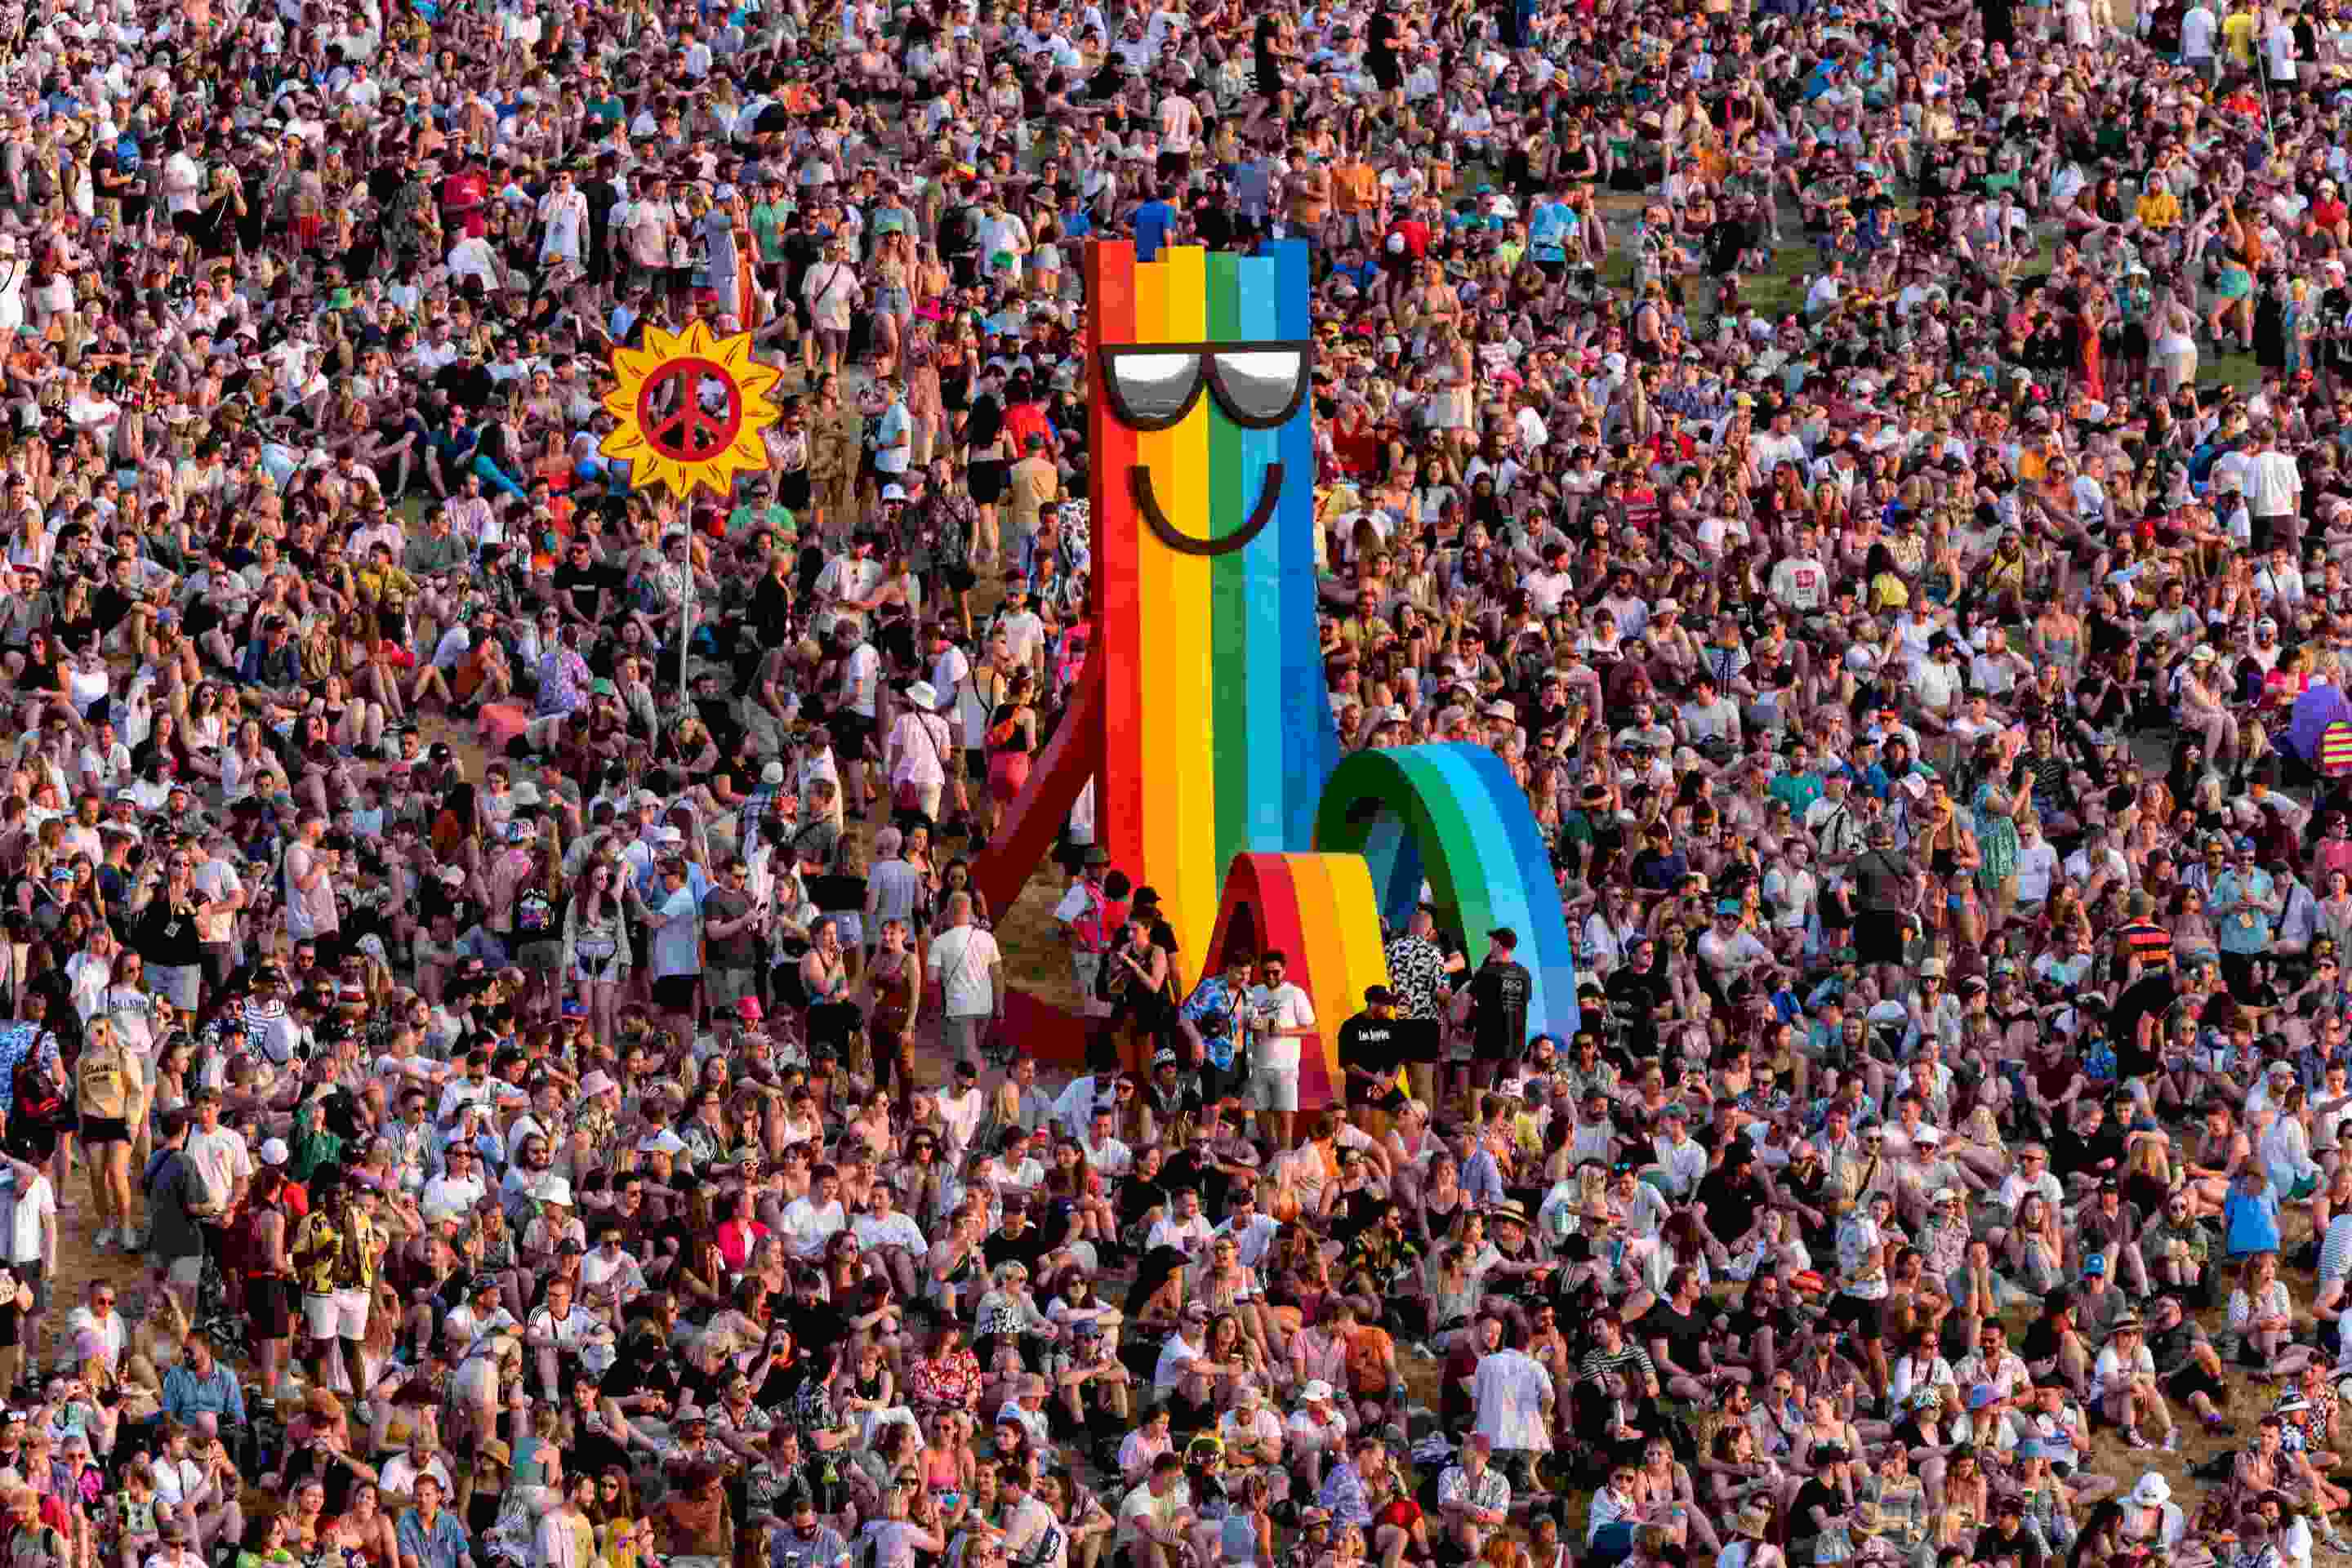 People at Glastonbury Festival in the UK